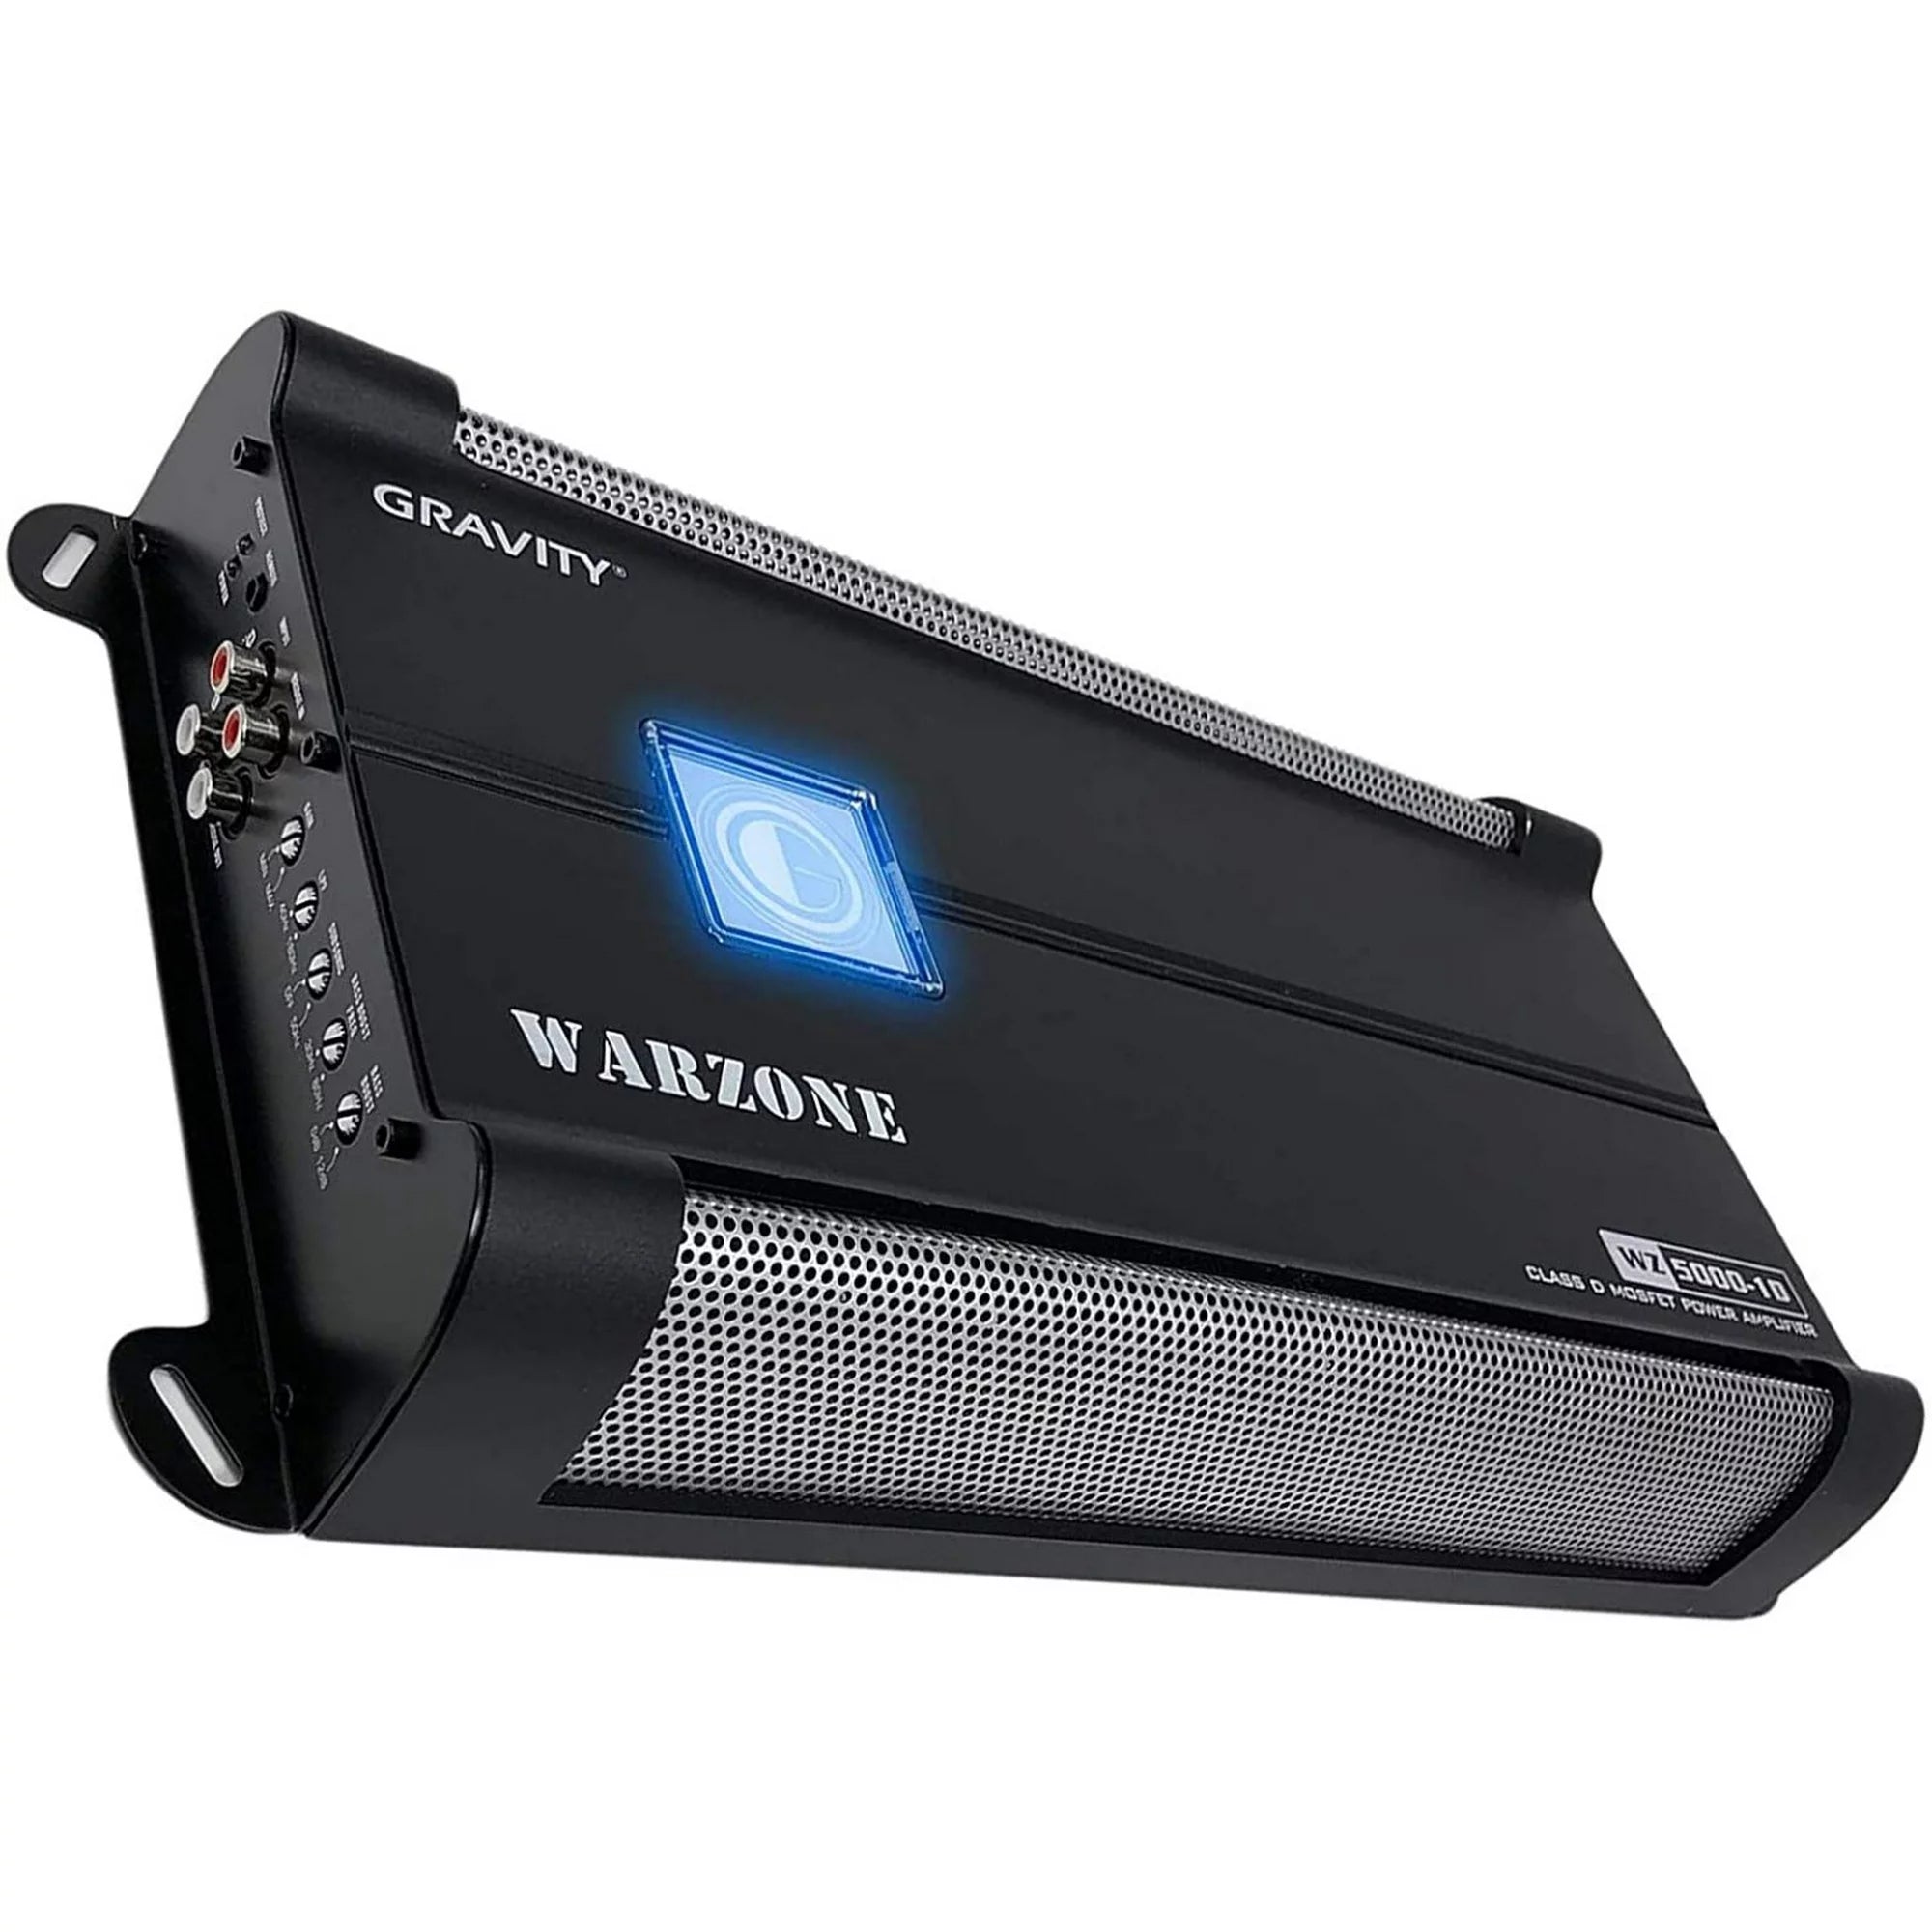 Gravity Audio WZ5000.1D Warzone 5000W Class D Amp 1/2/4 Ohm Stable with Remote Sub Control